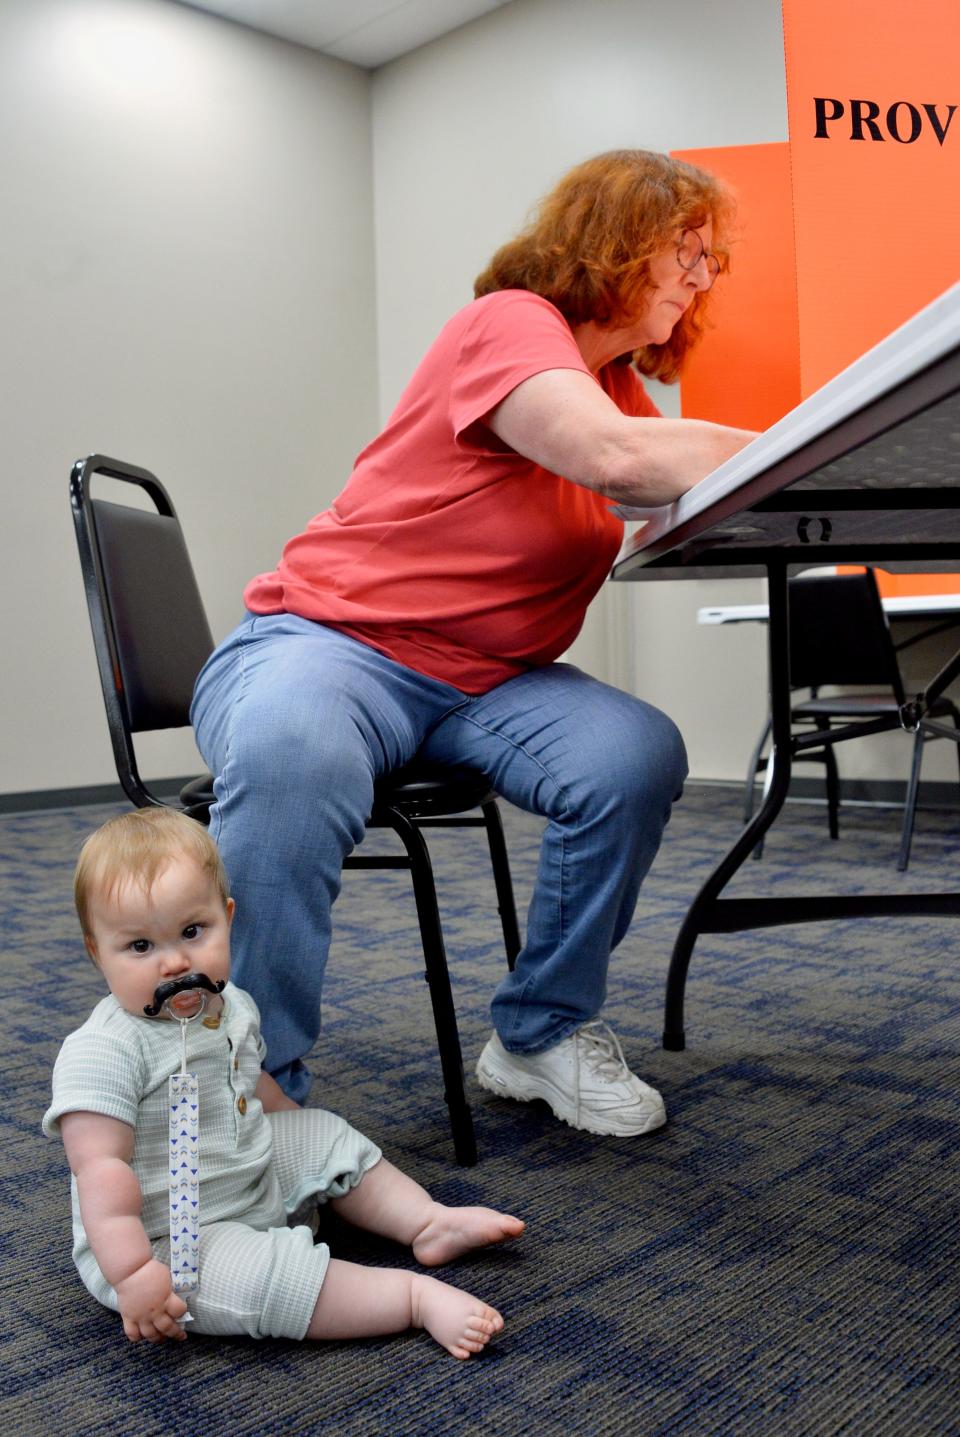 Teddy Tyler, 9 months, waits for his grandmother, Karen Ecker, as she fills out her provisional ballot for the Maryland primary at the Washington County Board of Elections headquarters on Tuesday morning. Ecker, who lives in the Hagerstown area, said she went to election headquarters to fill out a provisional ballot because she was babysitting nearby. She said she wants Teddy to learn how important it is to vote.